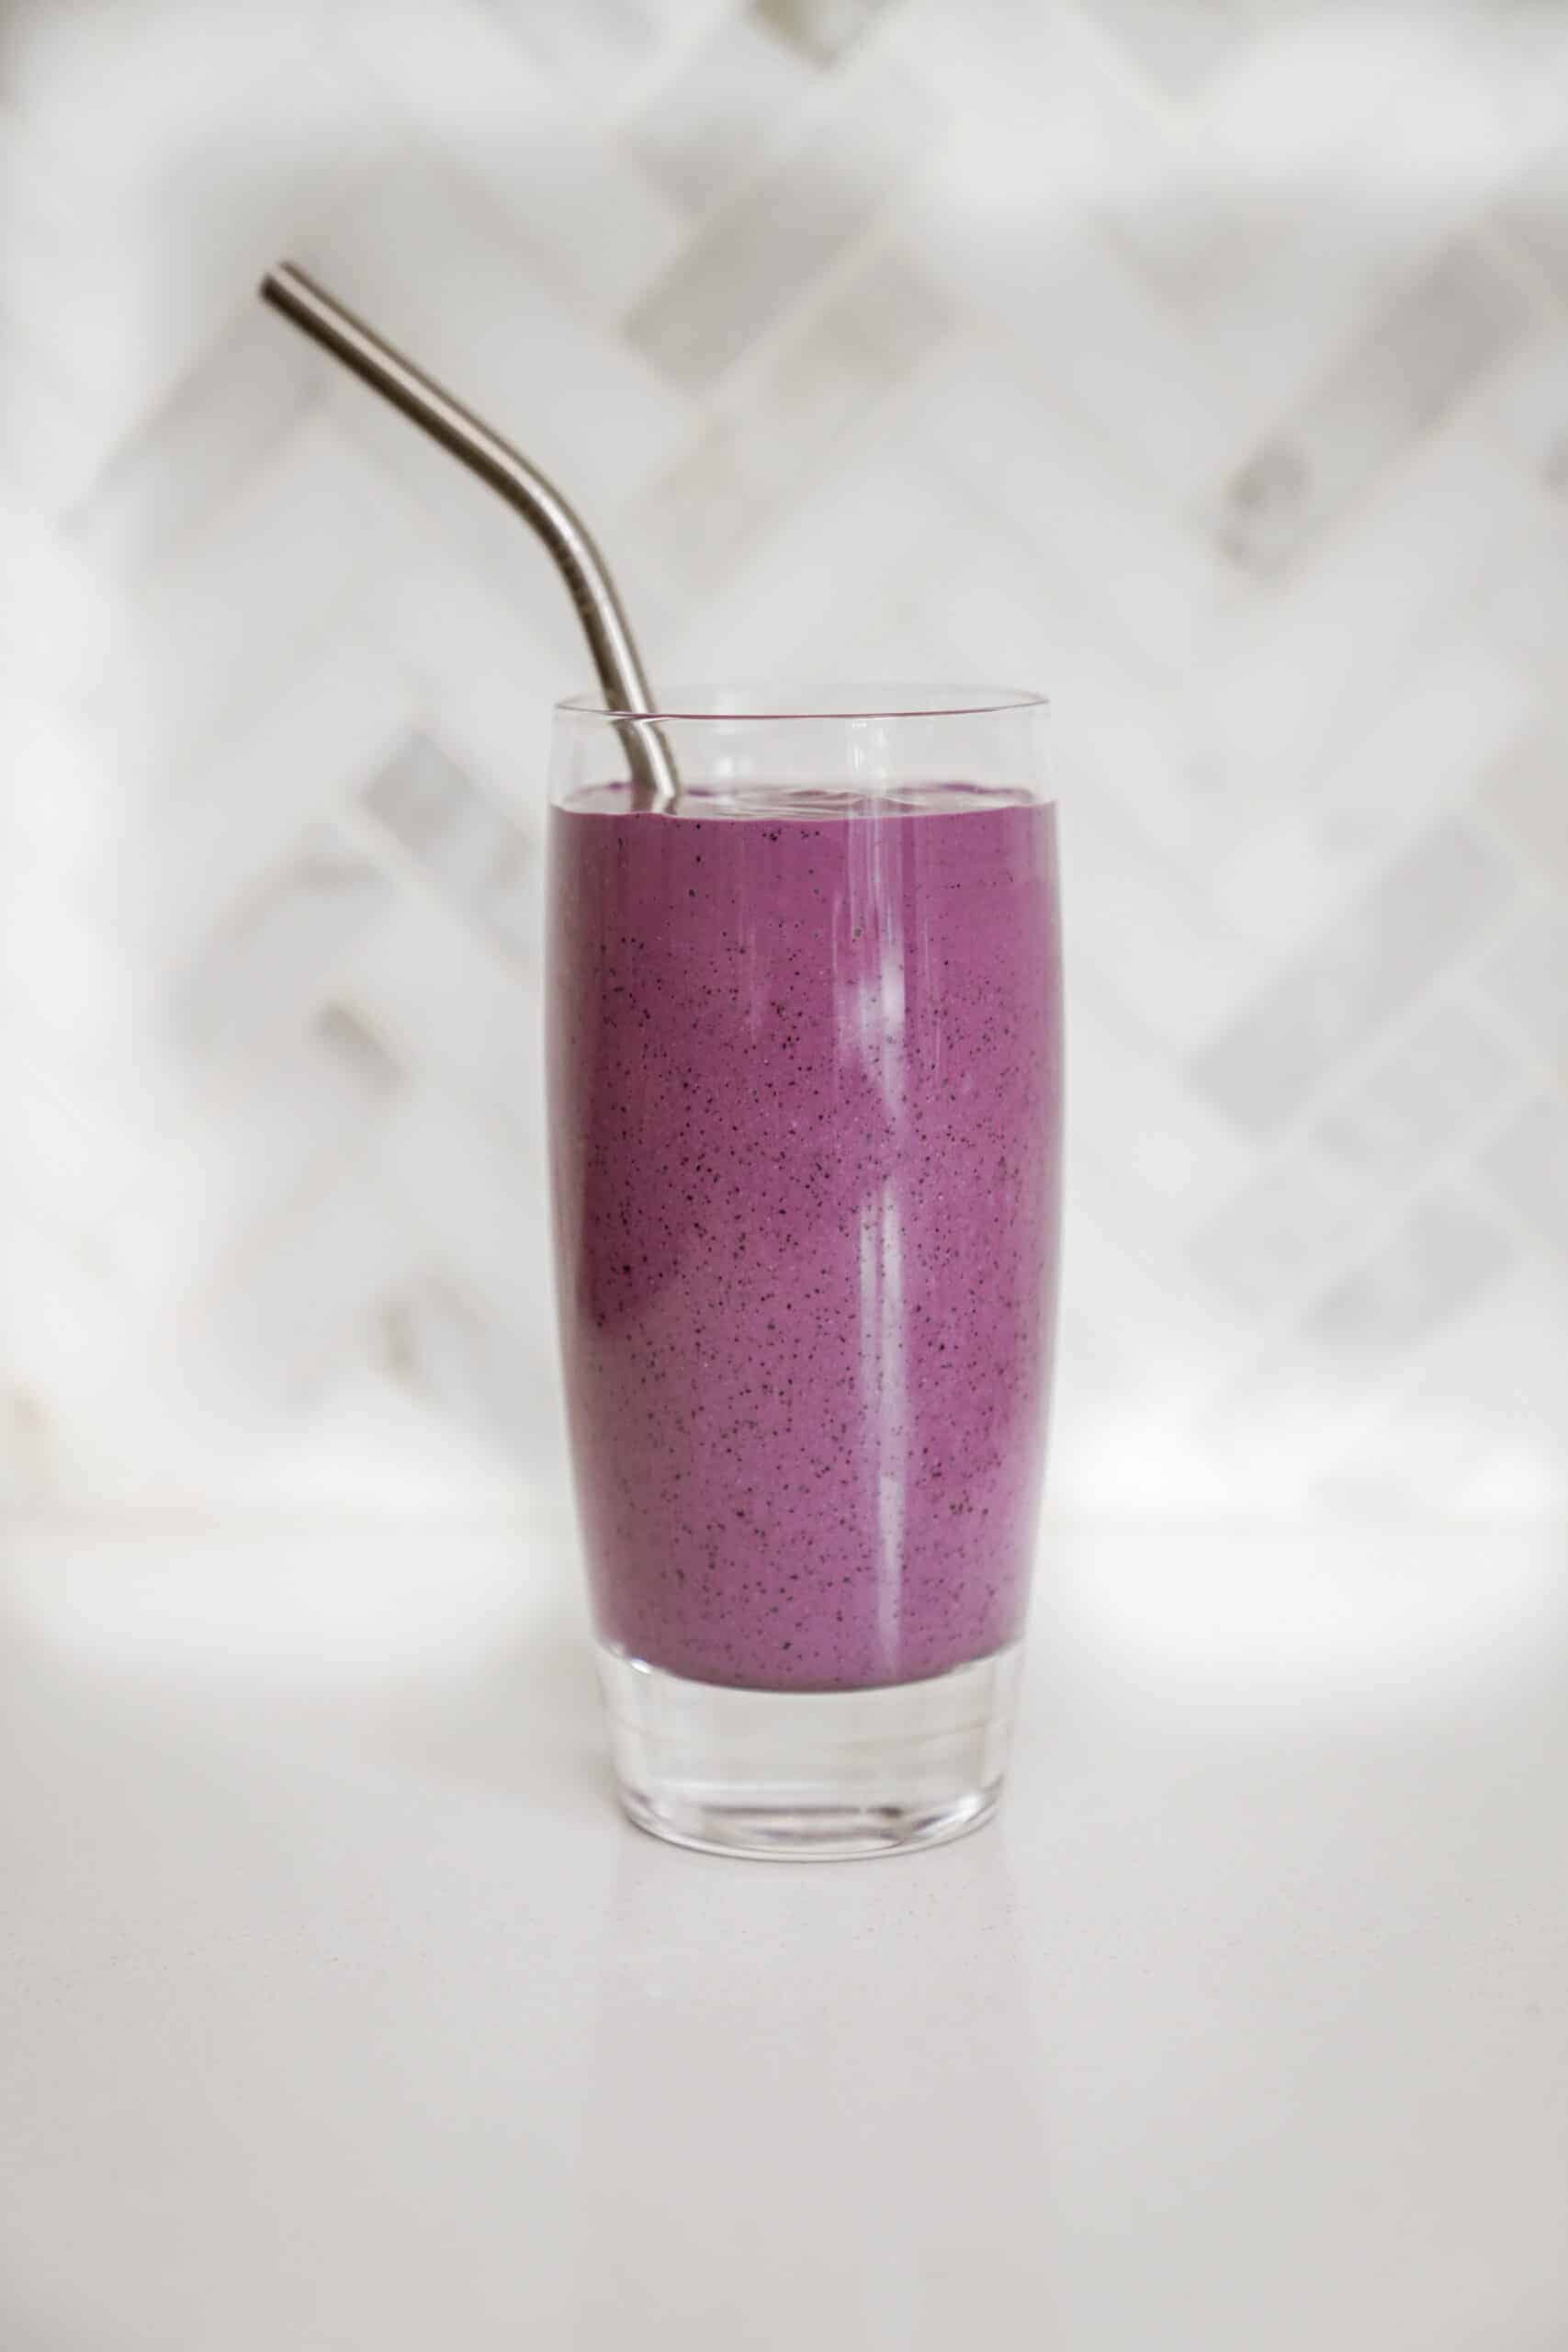 Cheesecake smoothie in a glass with a straw